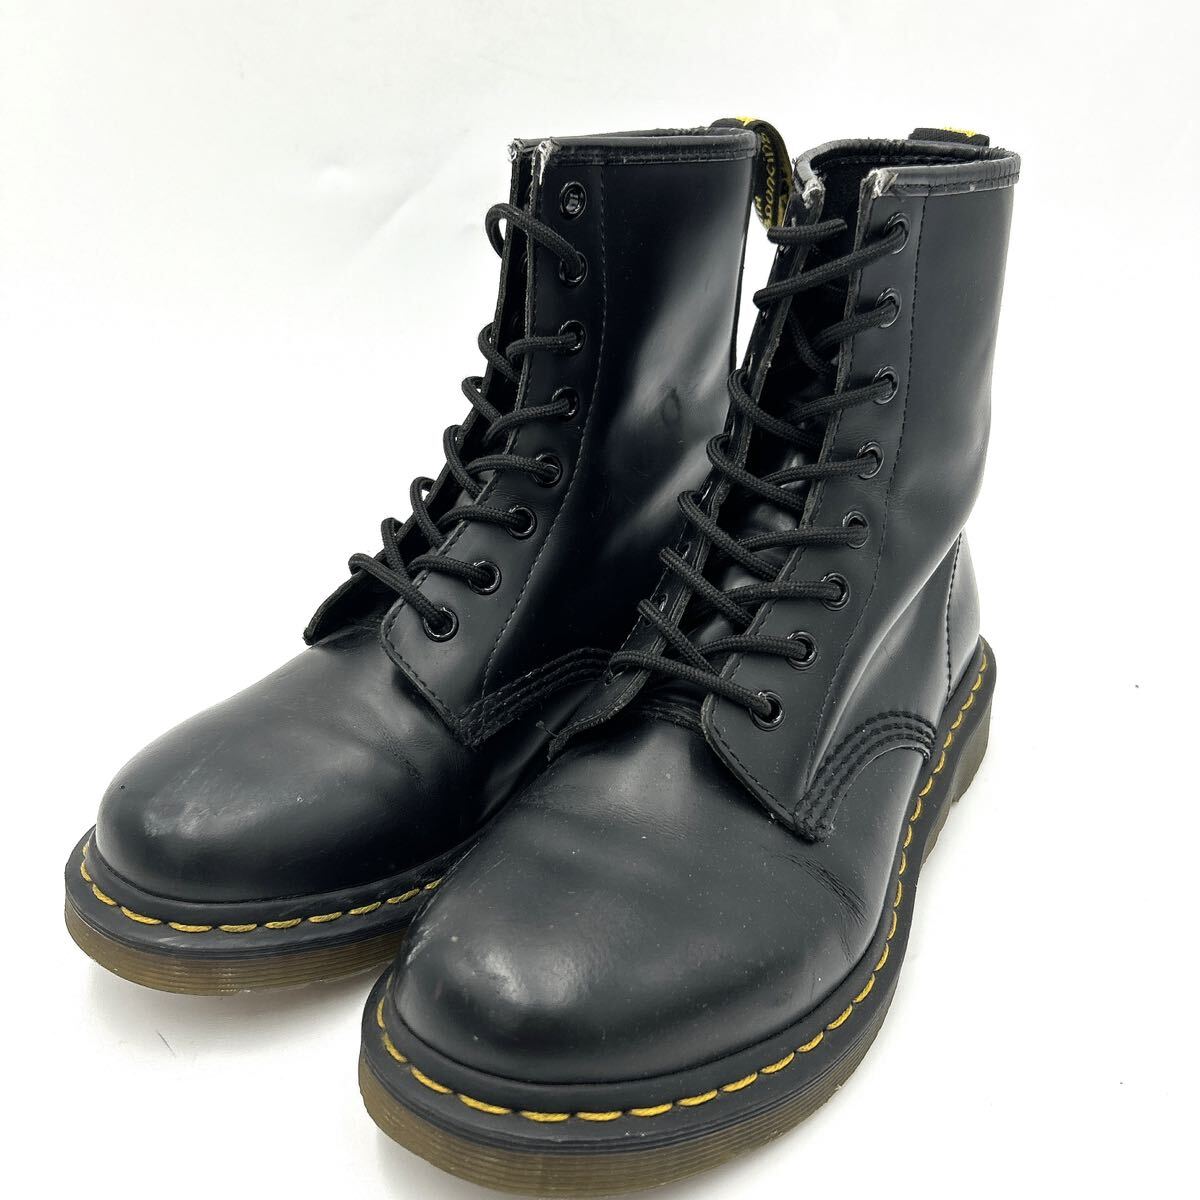 F #.. was done design \' popular yellow stitch \' Dr.Martens Dr. Martens original leather 8EYE race up boots leather shoes UK6 25cm gentleman shoes 